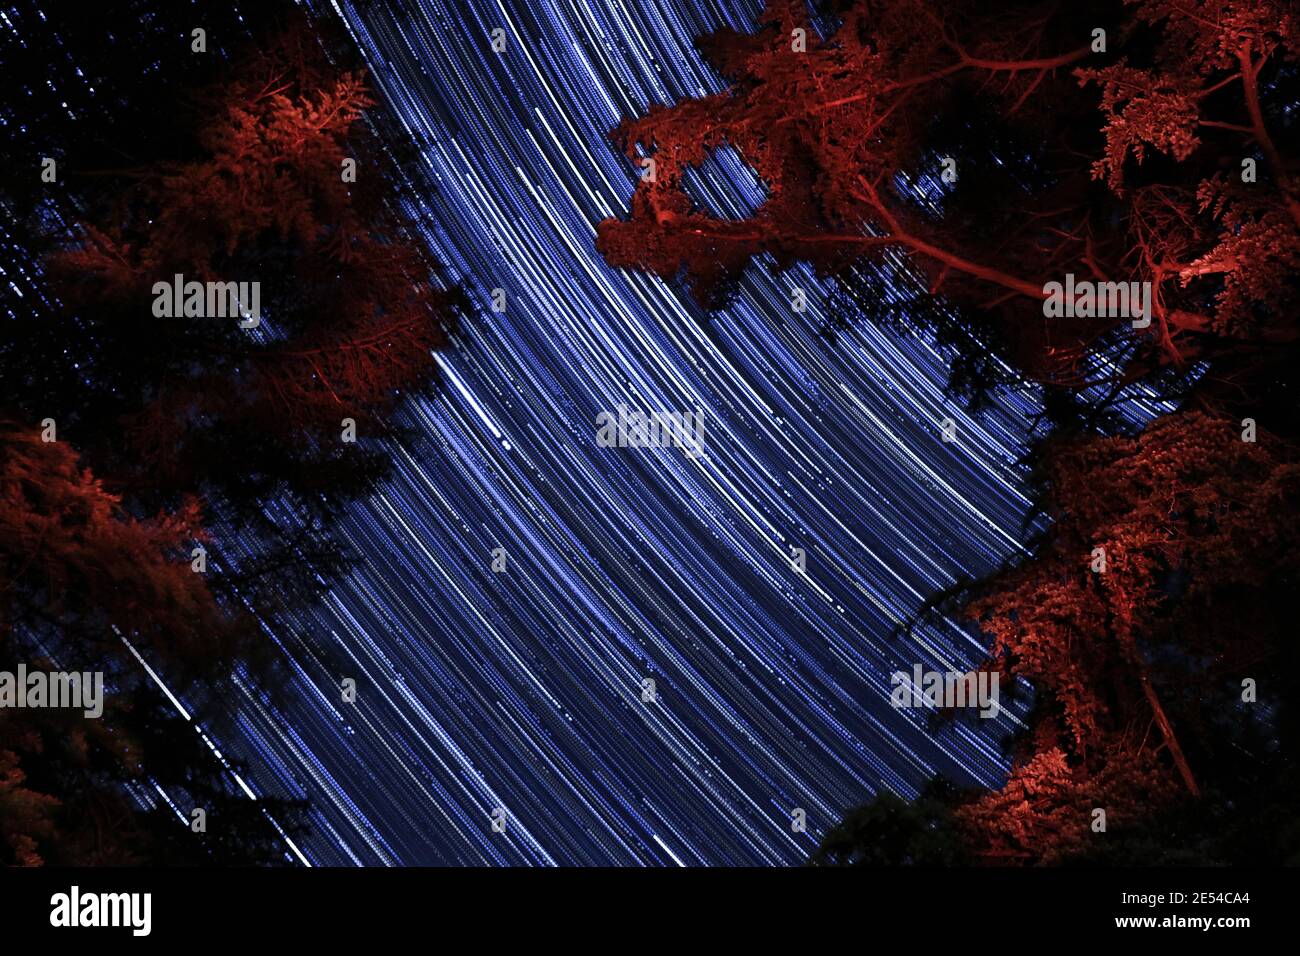 Starry night star trail with red-lit pine branches in the foreground. Sierra de la Ventana, Argentina. Stock Photo